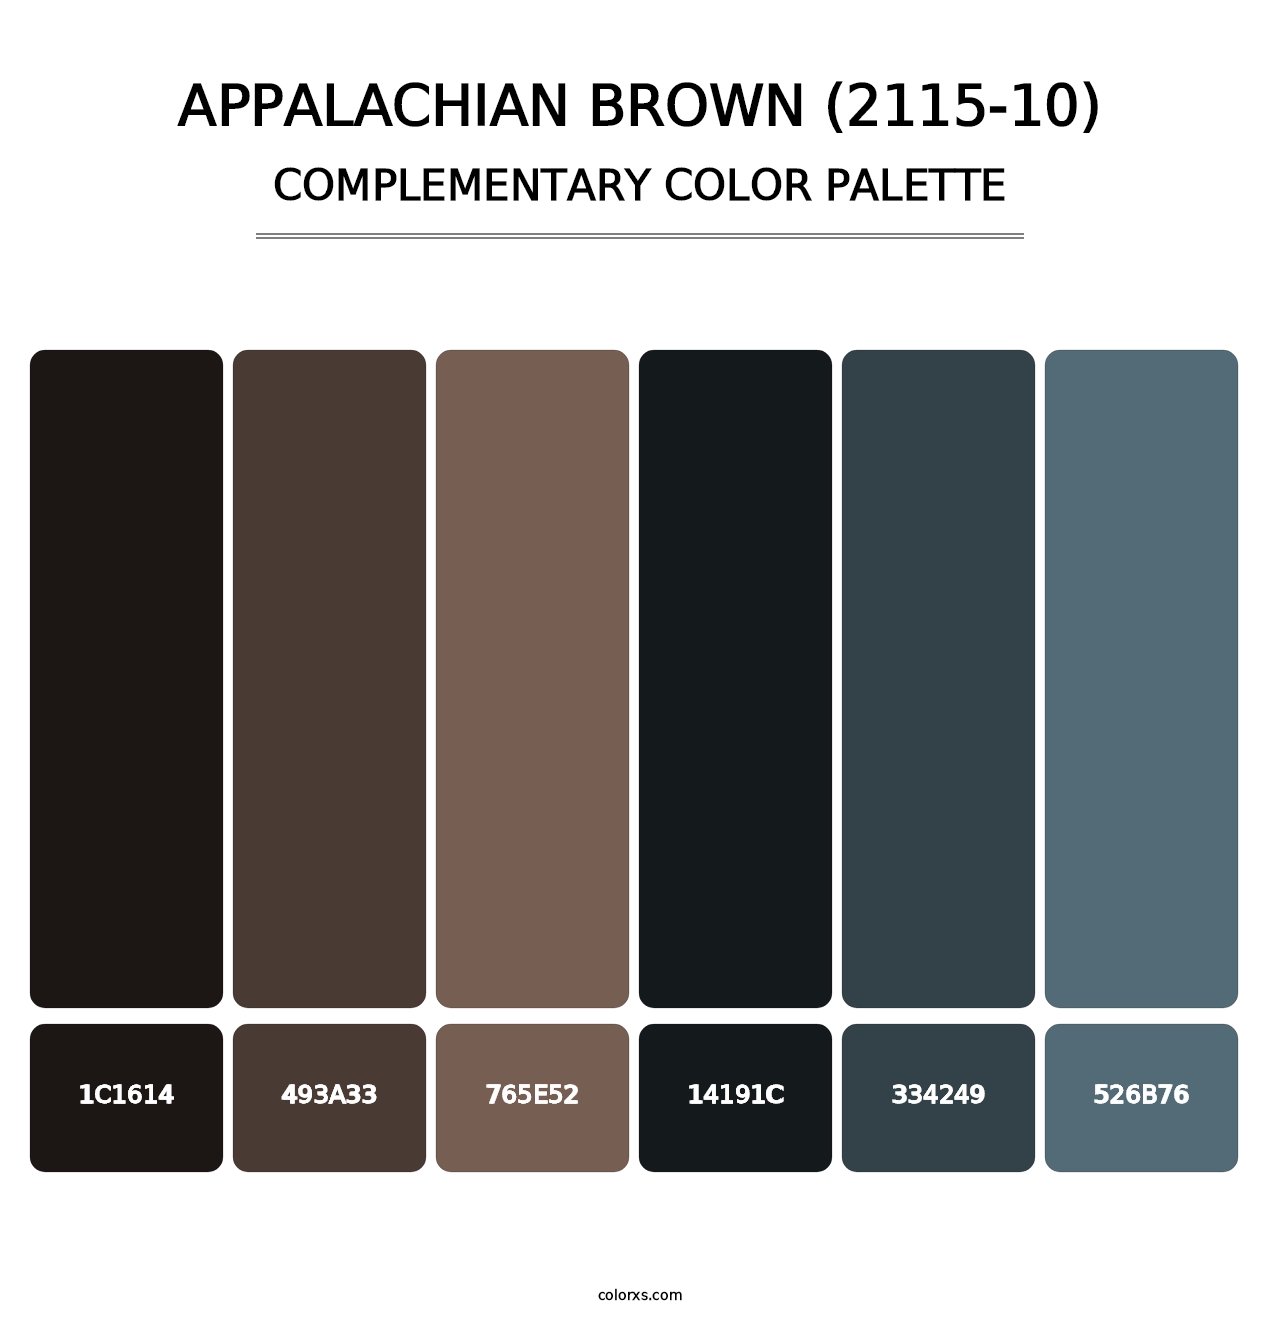 Appalachian Brown (2115-10) - Complementary Color Palette